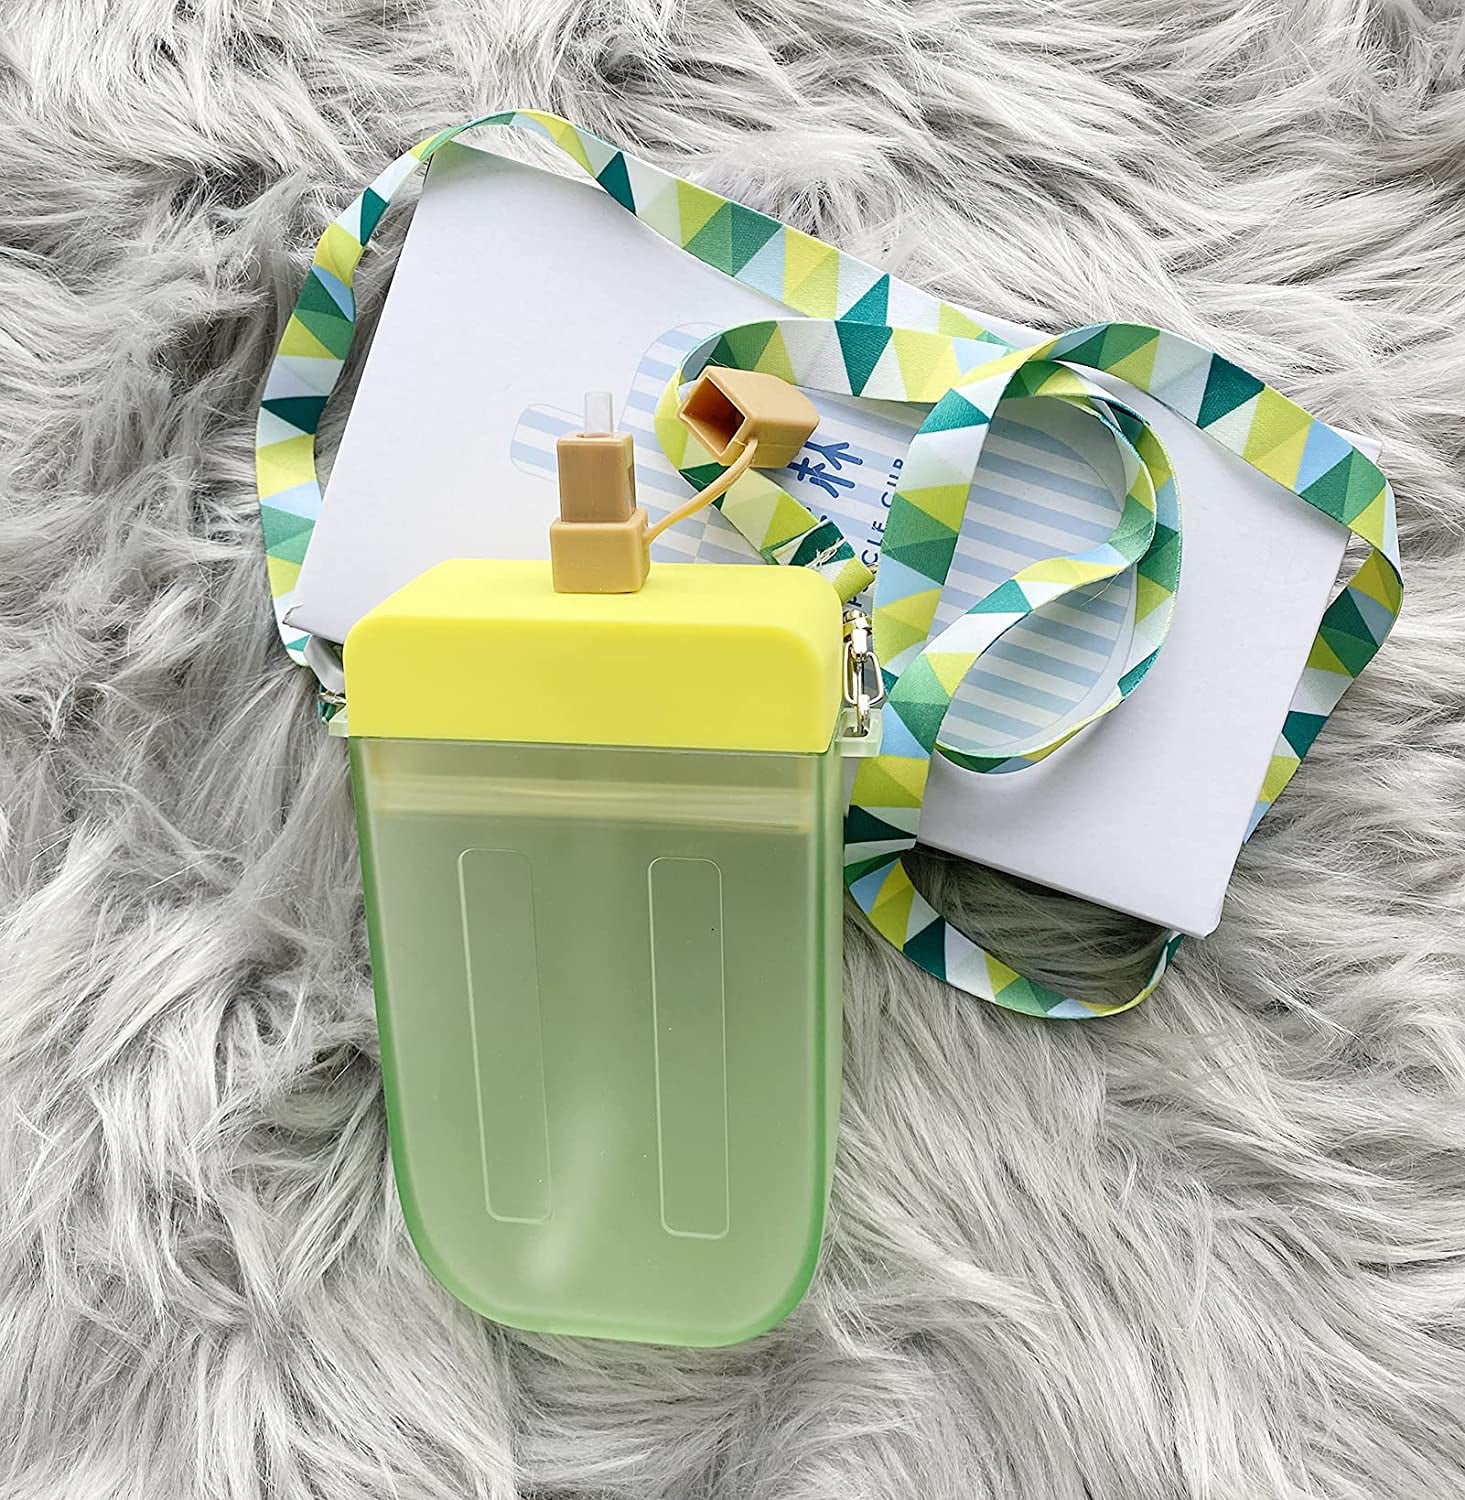 Cute Water Bottles with Straws Homestine Creative Ice Cream Plastic Popsicle Drink Water Bottles Blue Adjustable Shoulder Strap For Outdoor Camping Travel BPA Free Leakproof Transparent Water Jug